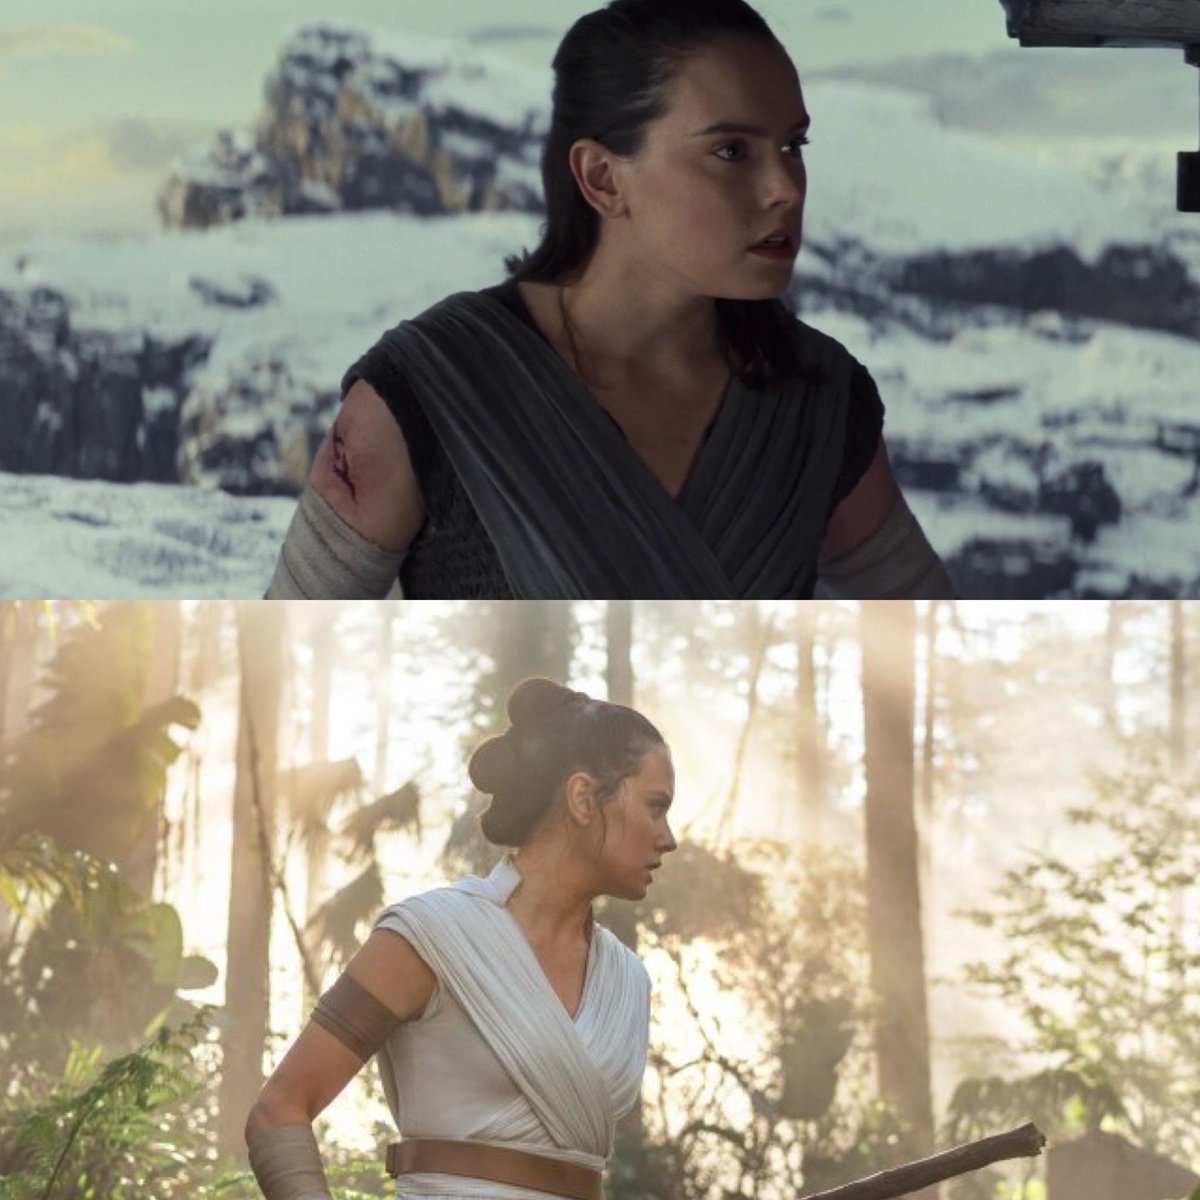  #sab Alina  Heroines having their symbolic scars magically removed so the writer can pretend their experience didn't matter and they are still "pure"  Rey